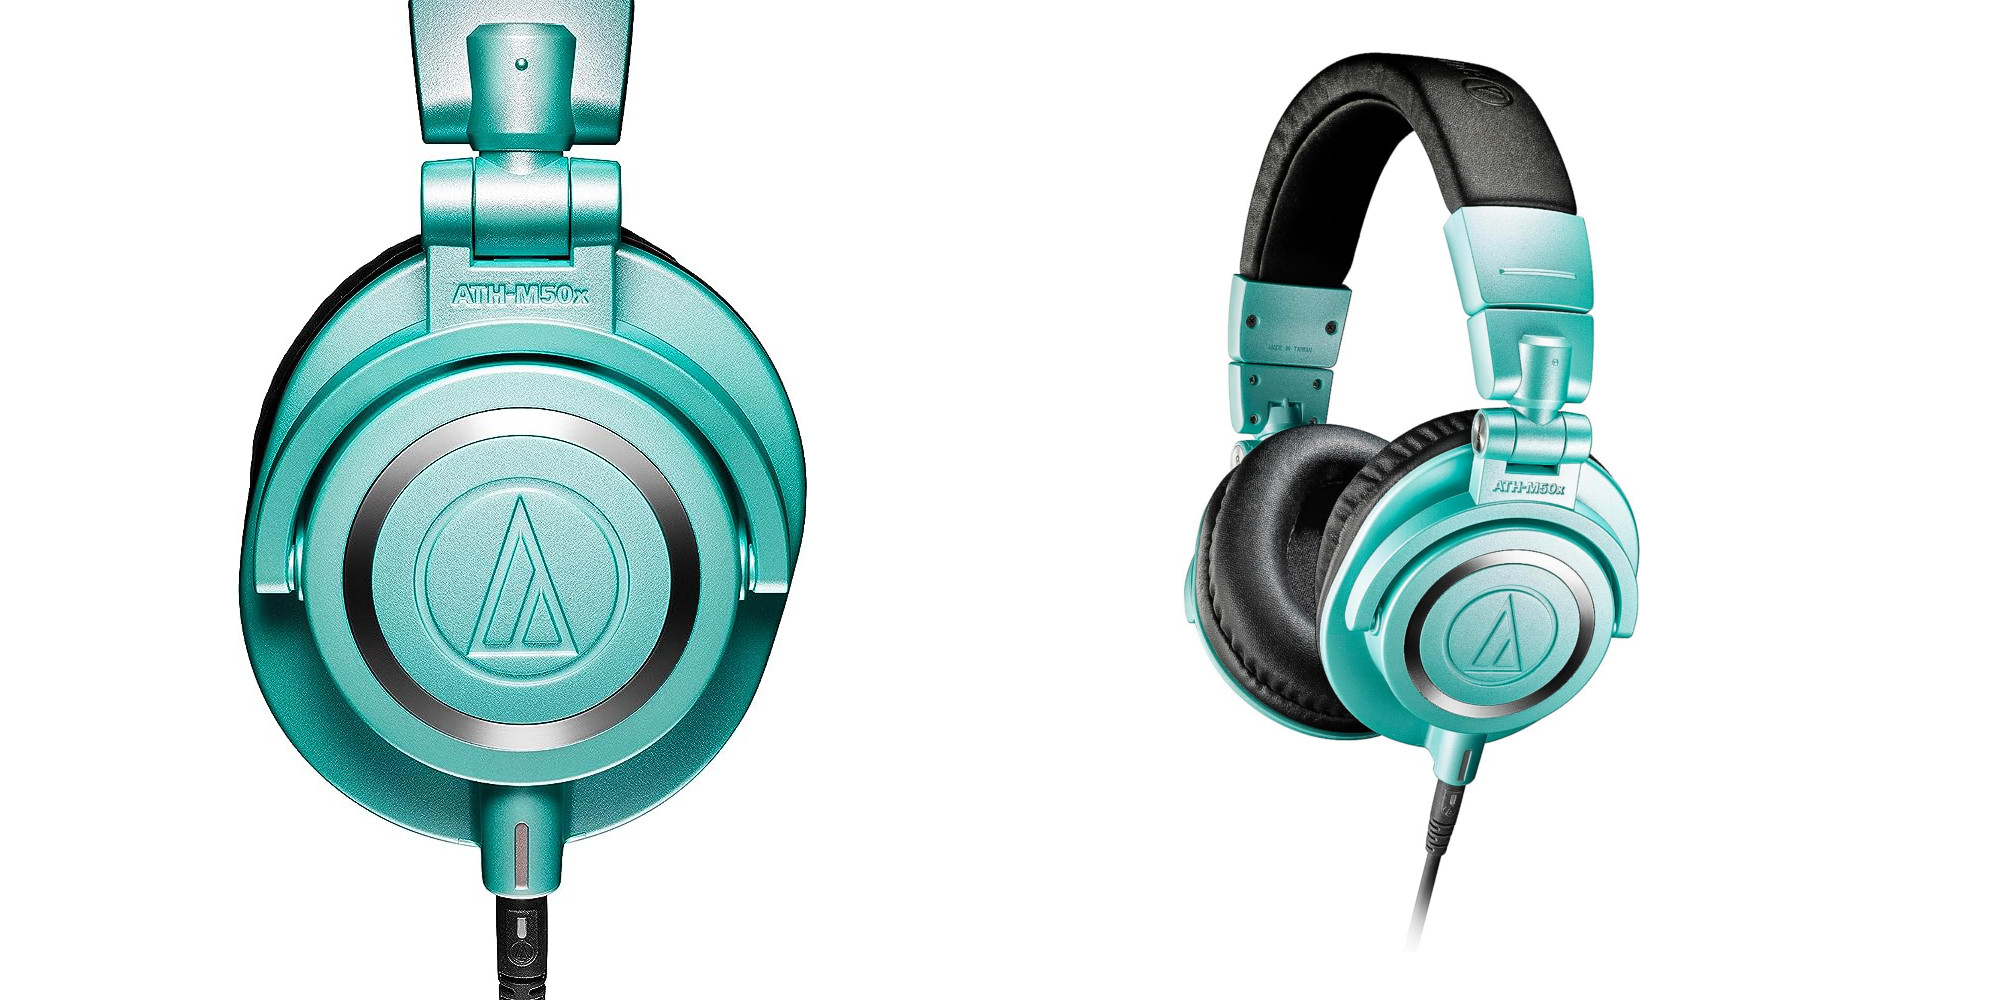 Audio-Technica ATH-M50x Review: Great All-Around Studio Headphones, audio  technica ath-m50x 